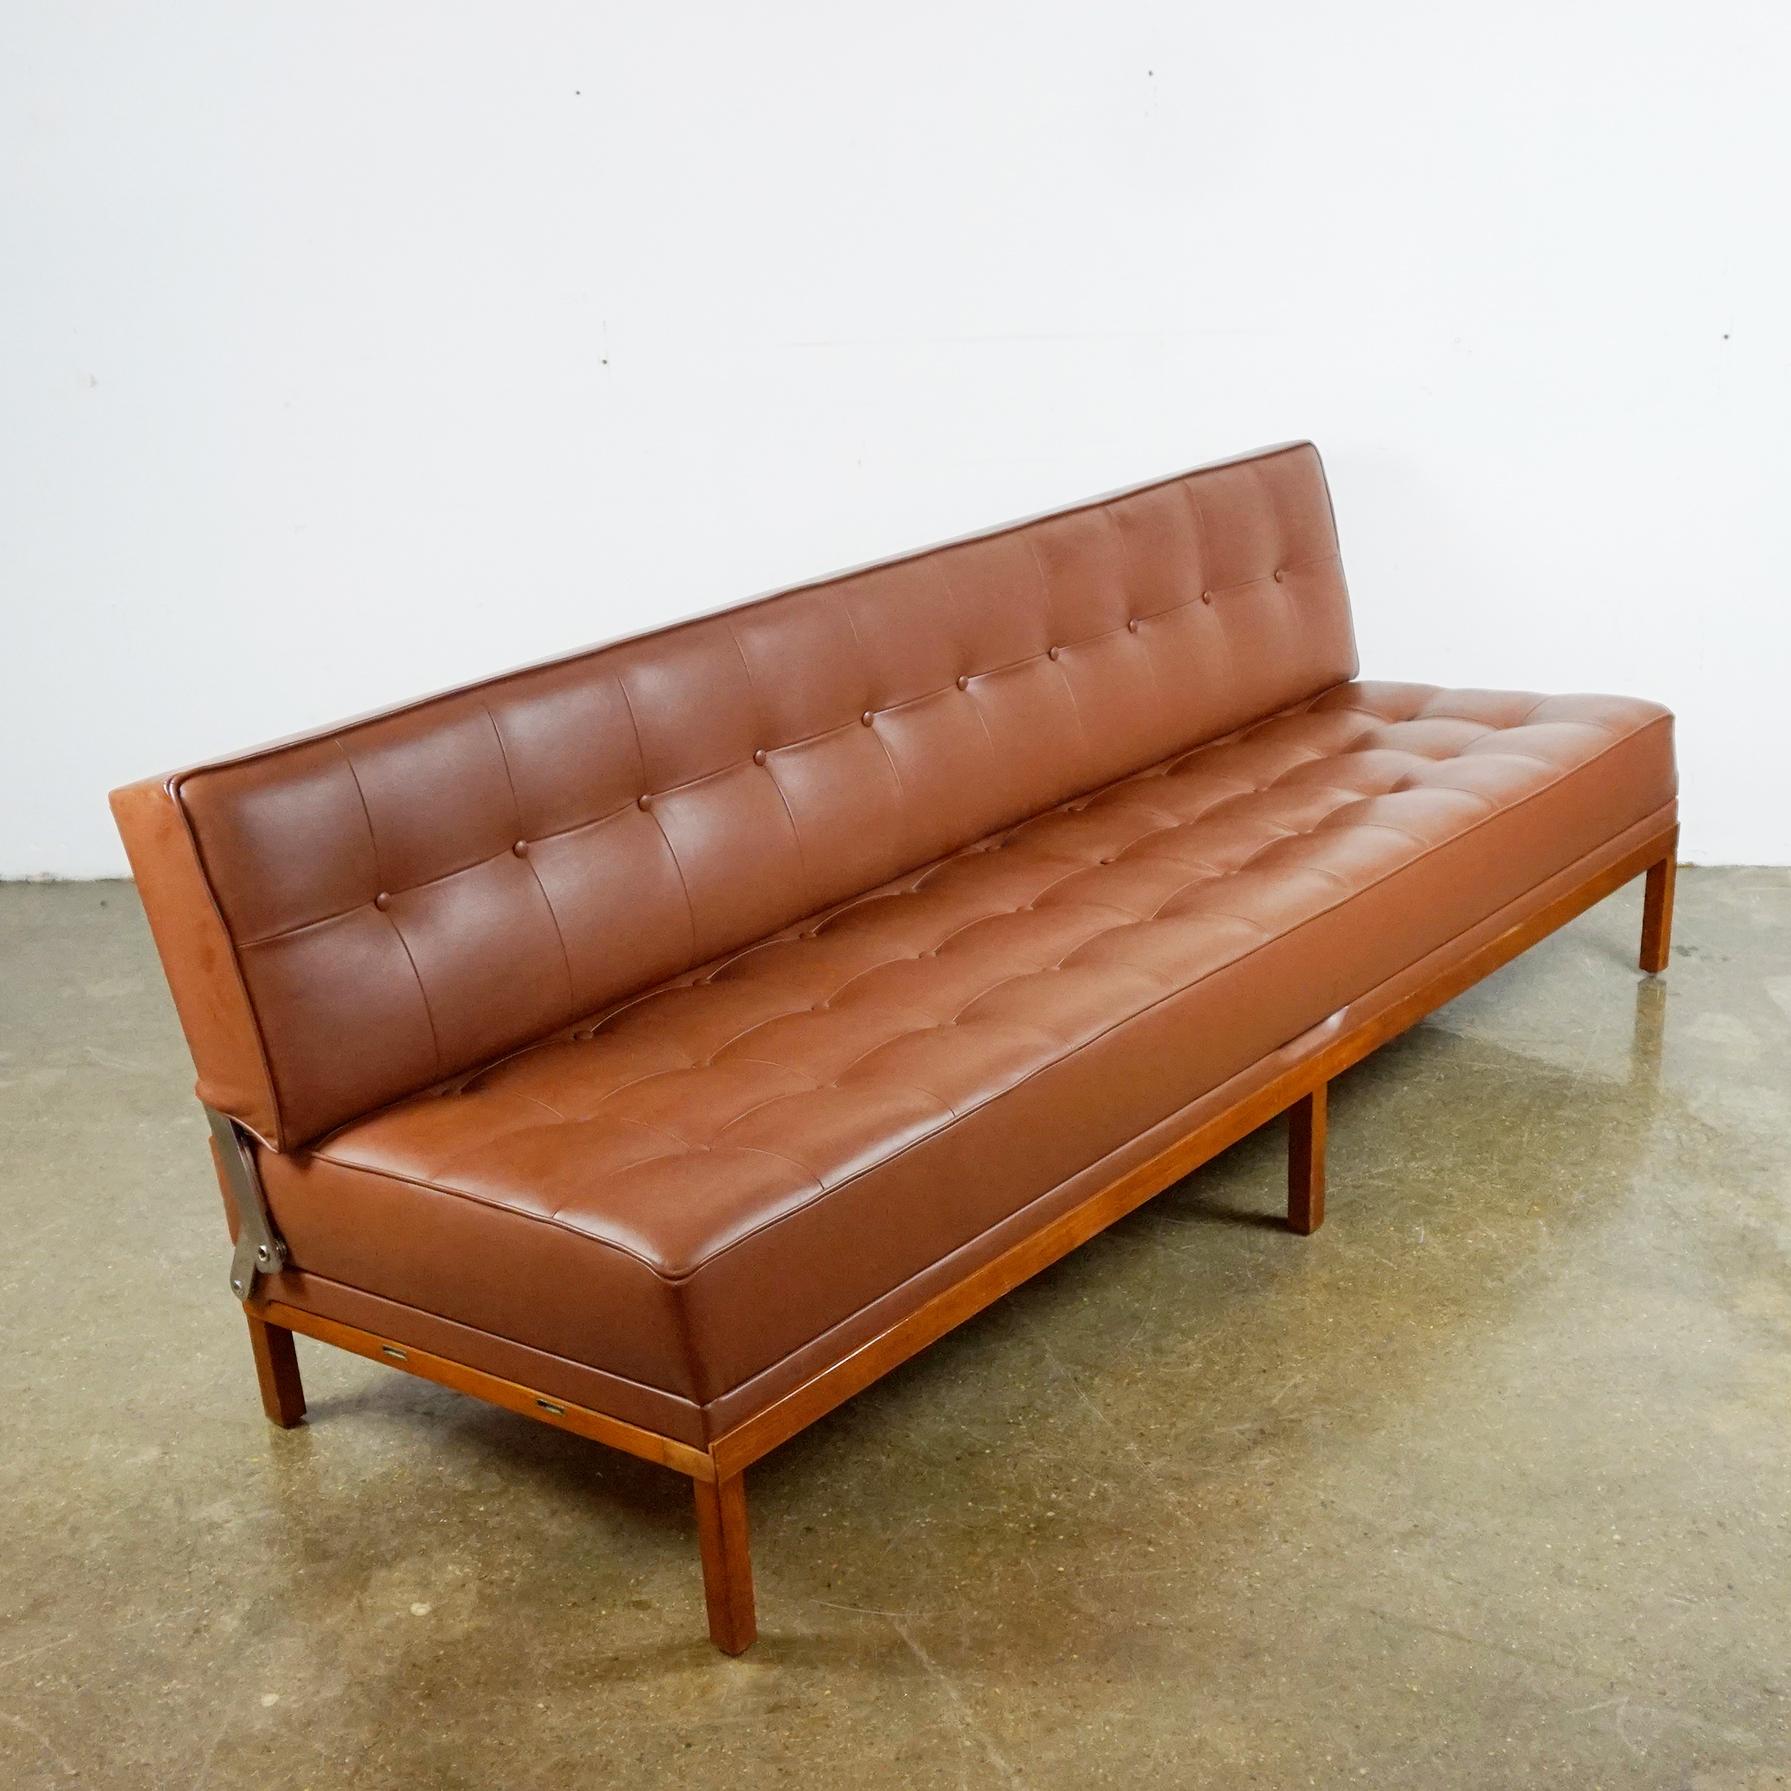 Mid-20th Century Mid-Century Modern Cognac Leather Sofa or Daybed by Johannes Spalt for Wittmann